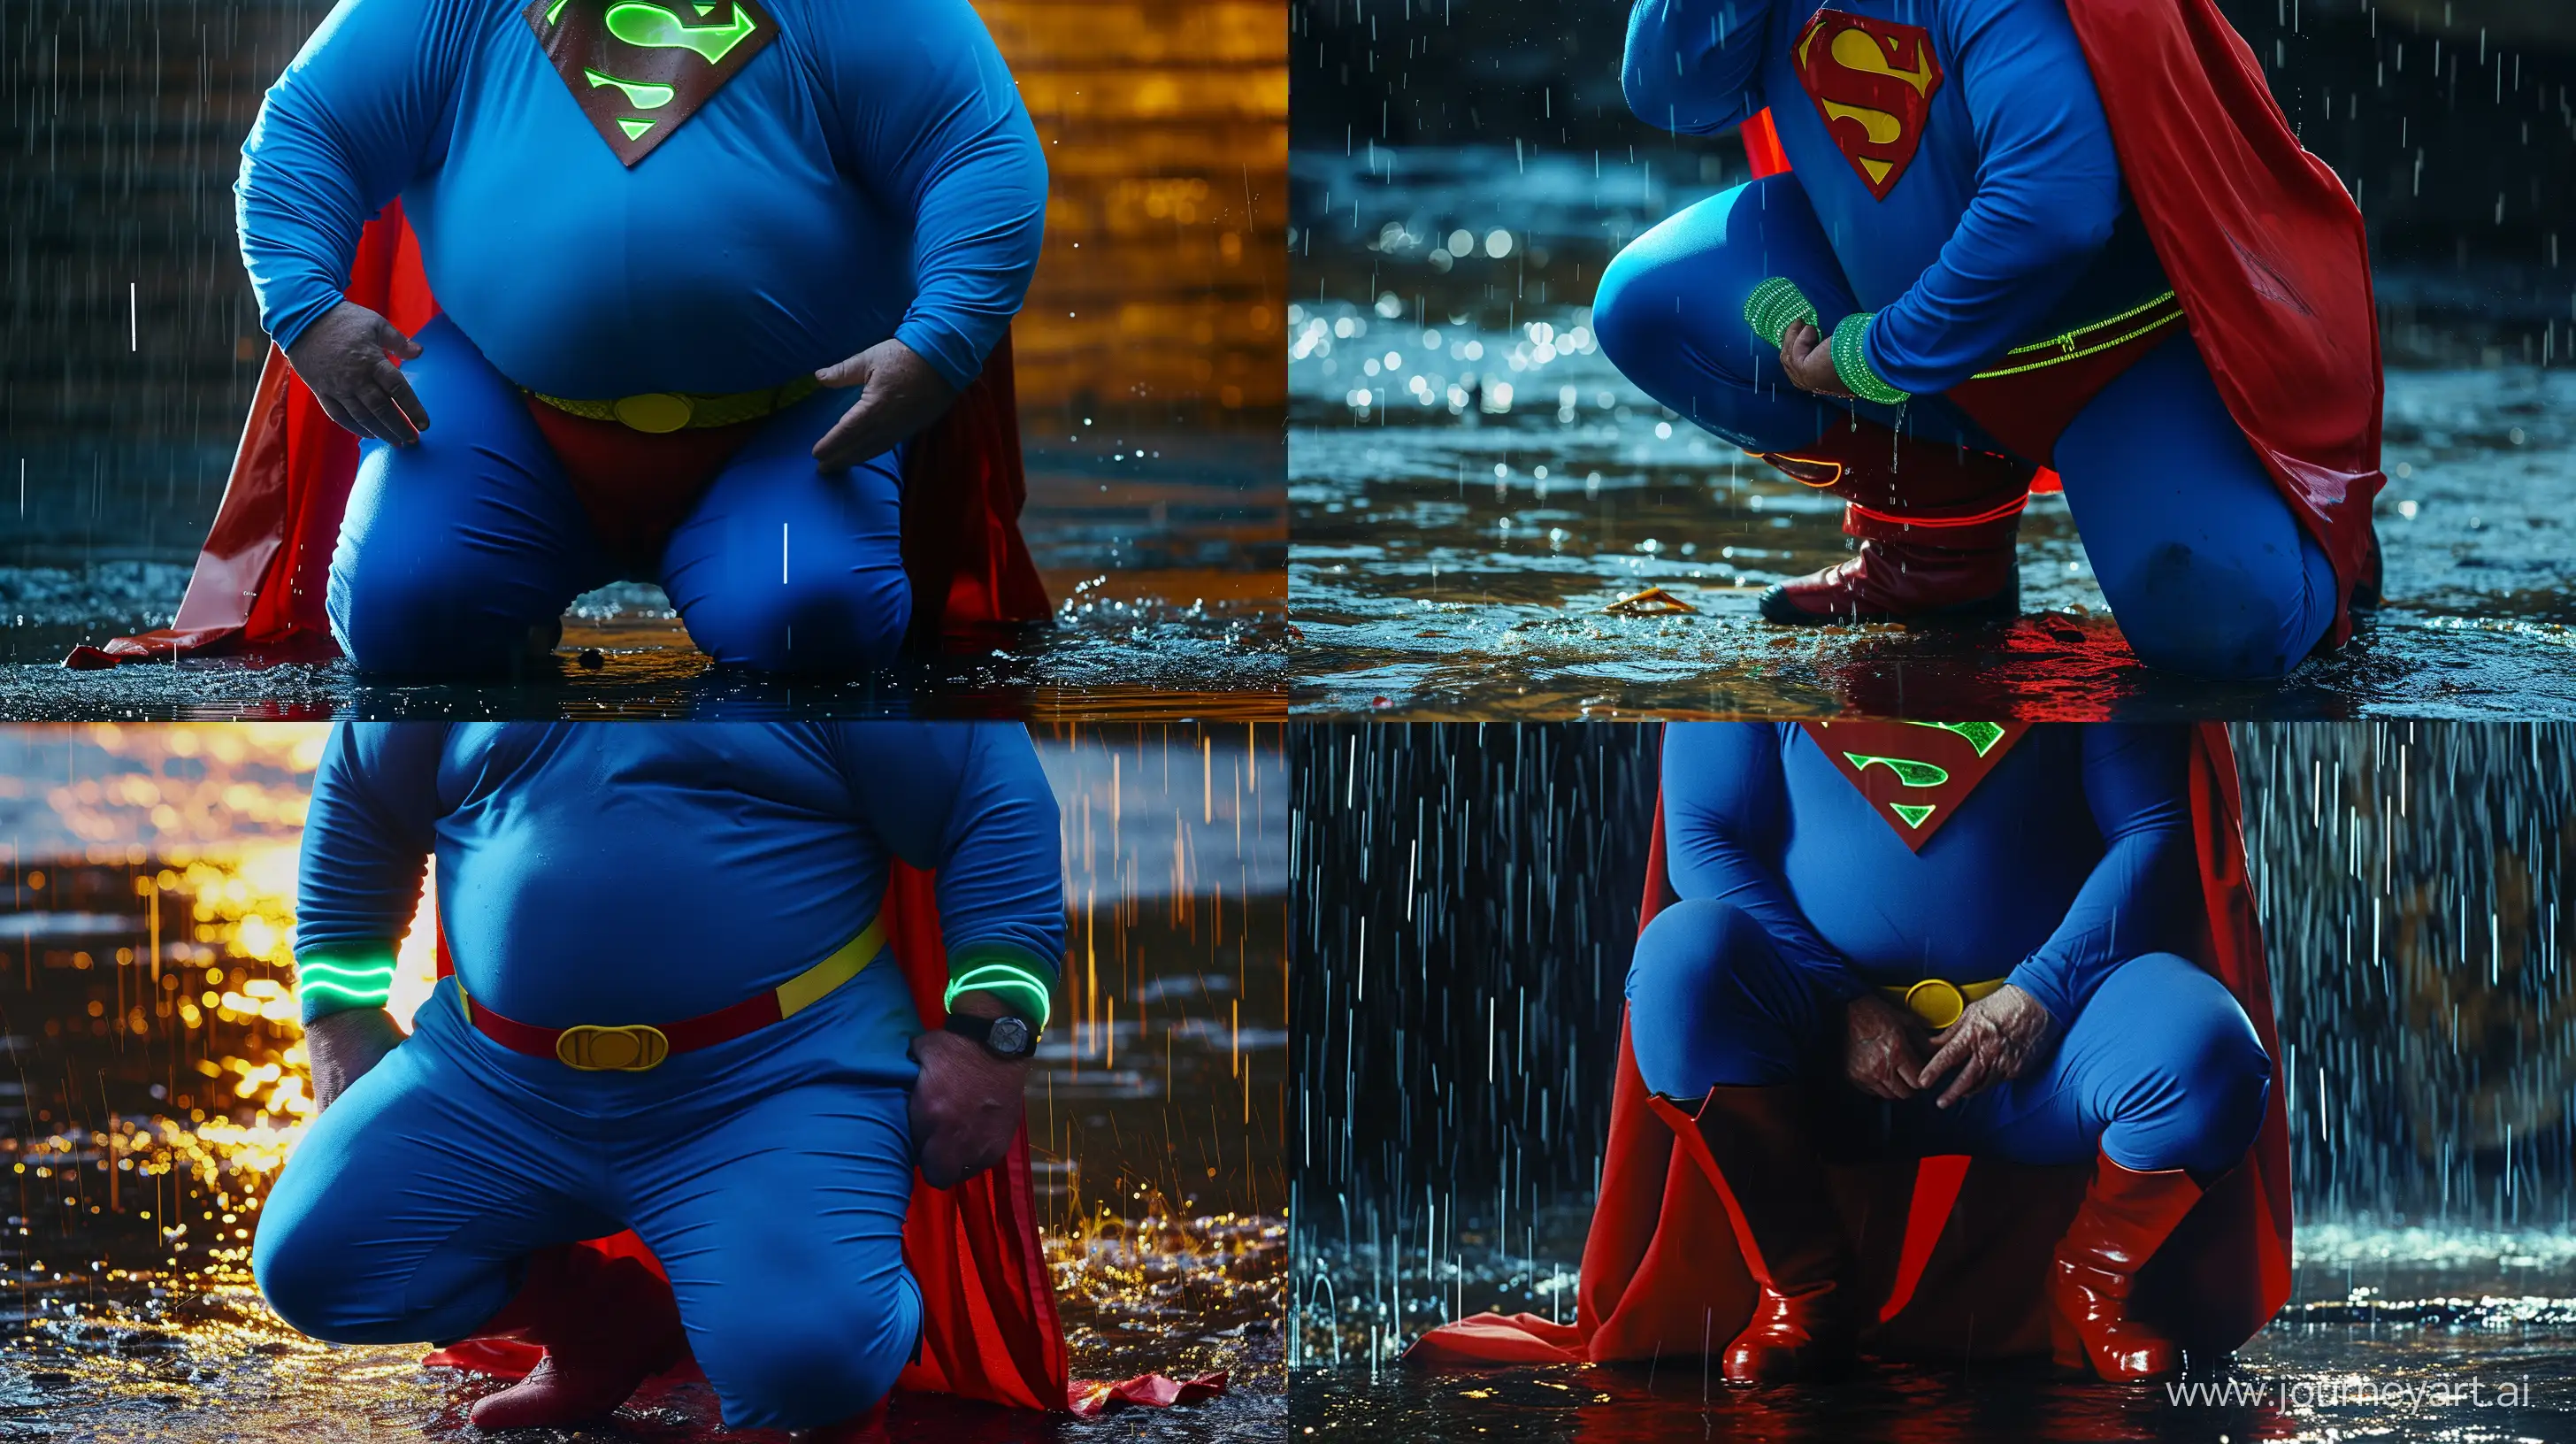 Vintage-Superman-Cosplay-in-Rain-Nostalgic-1978-Costume-Kneeling-by-the-River